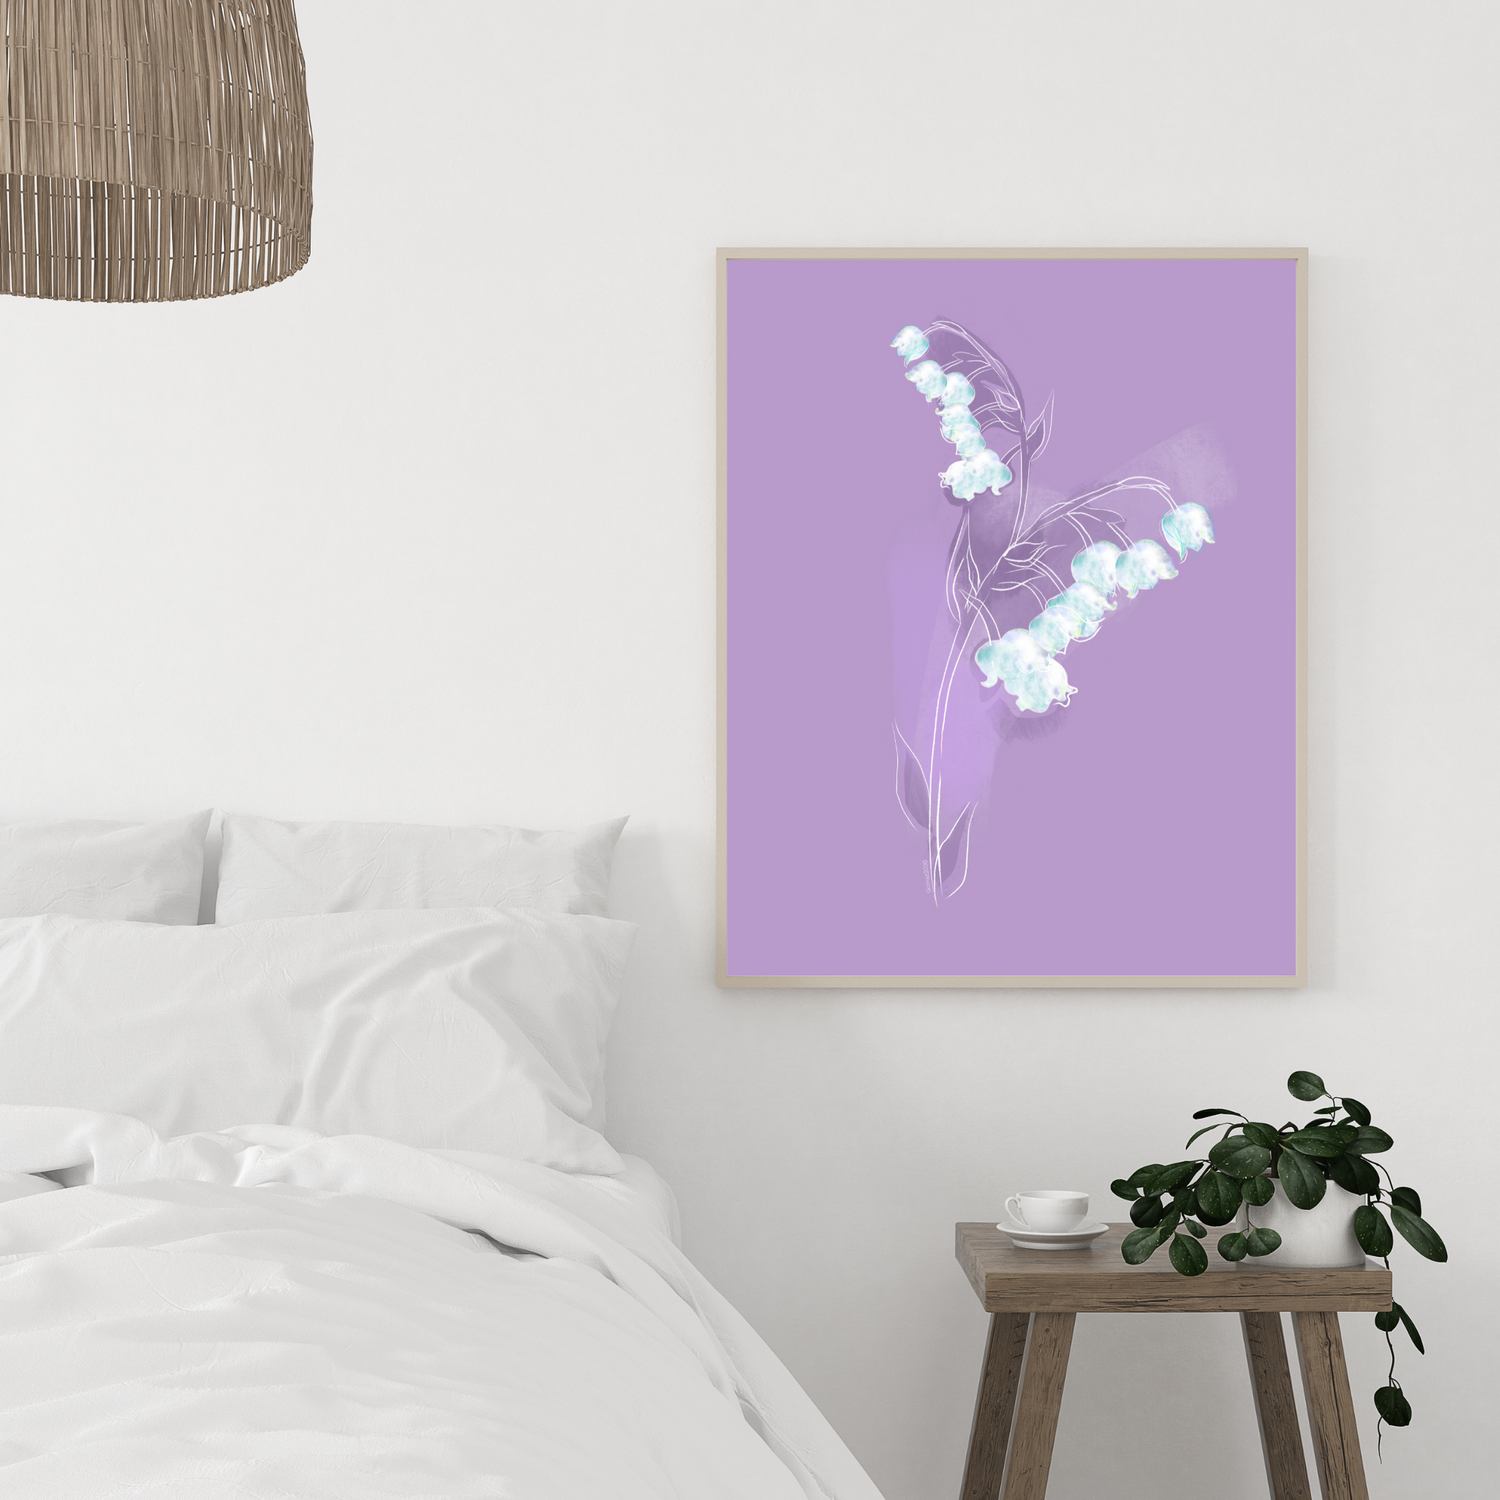 An example of the Lily of the Valley painting by ArisaTeam in a bedroom